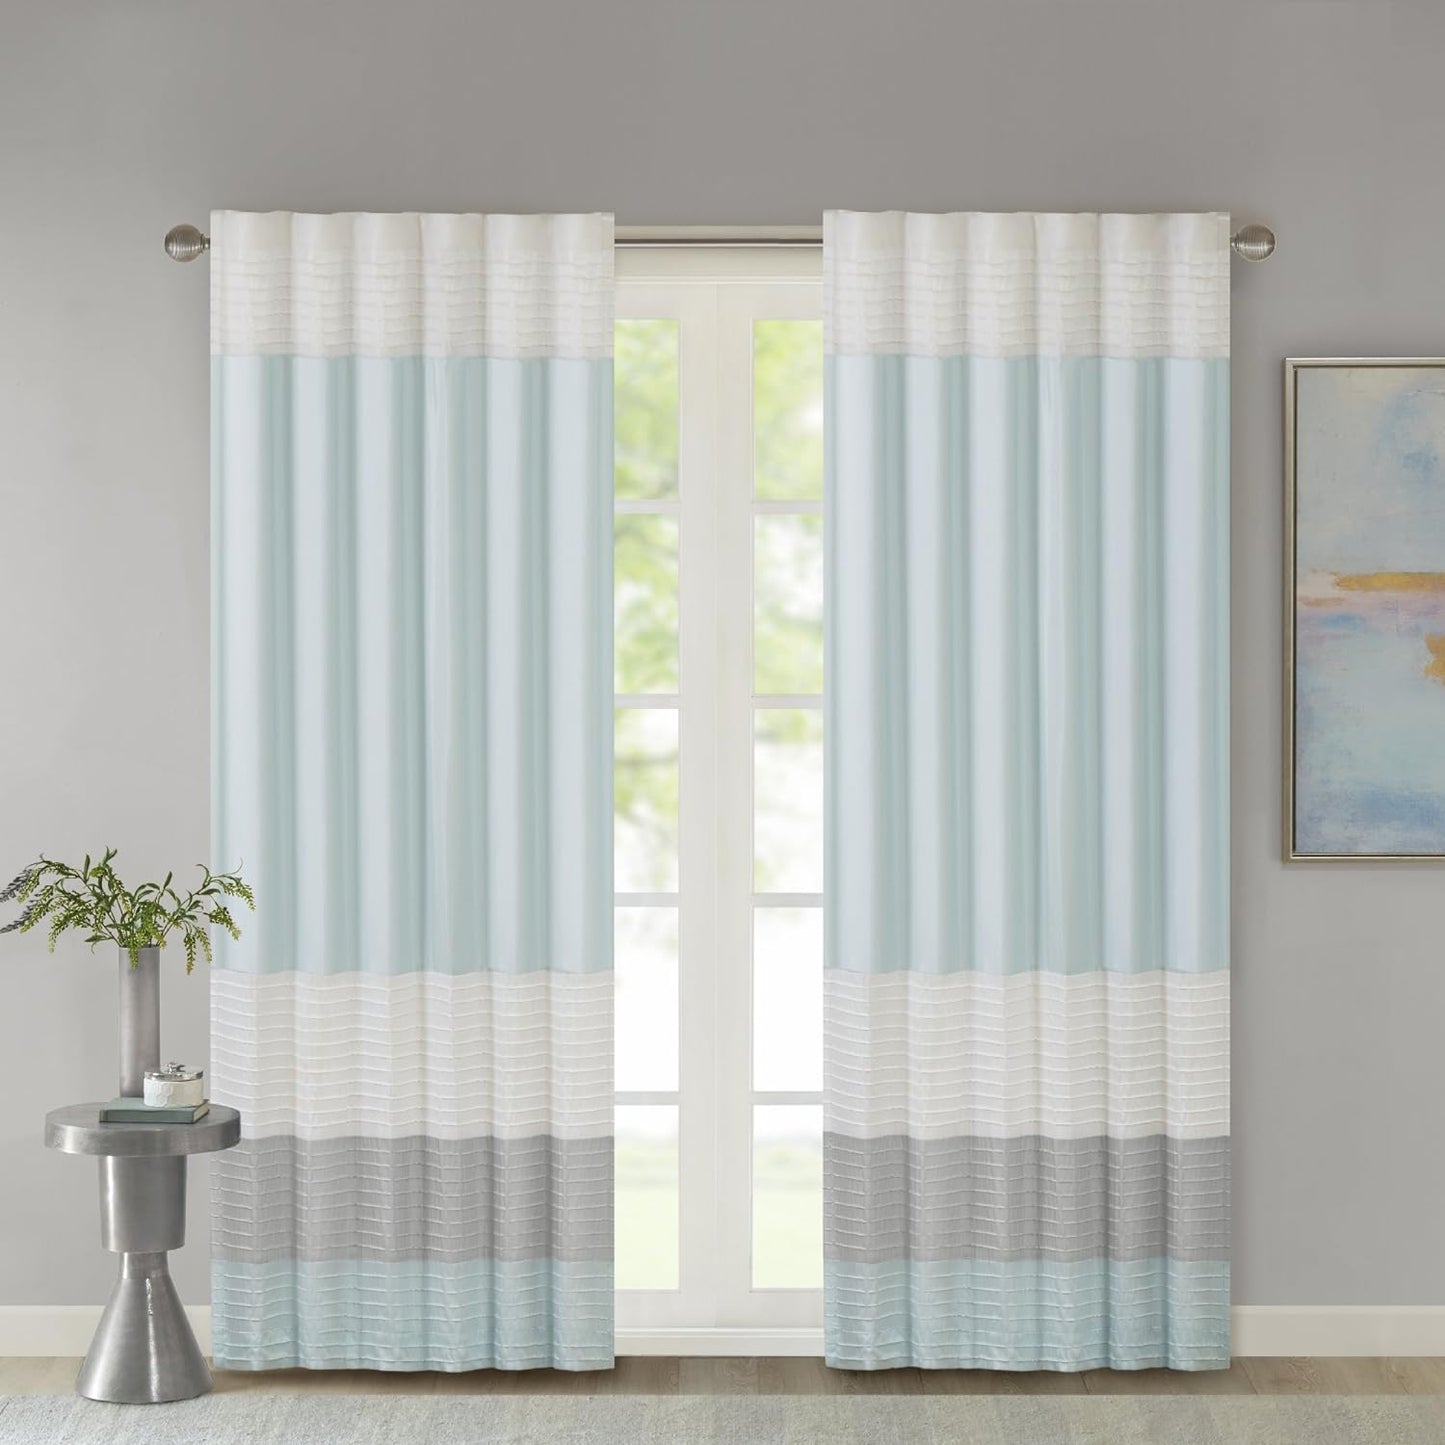 Madison Park Amherst Single Panel Faux Silk Rod Pocket Curtain with Privacy Lining for Living Room, Window Drape for Bedroom and Dorm, 50X84, Black  Madison Park Aqua 84"X50" 